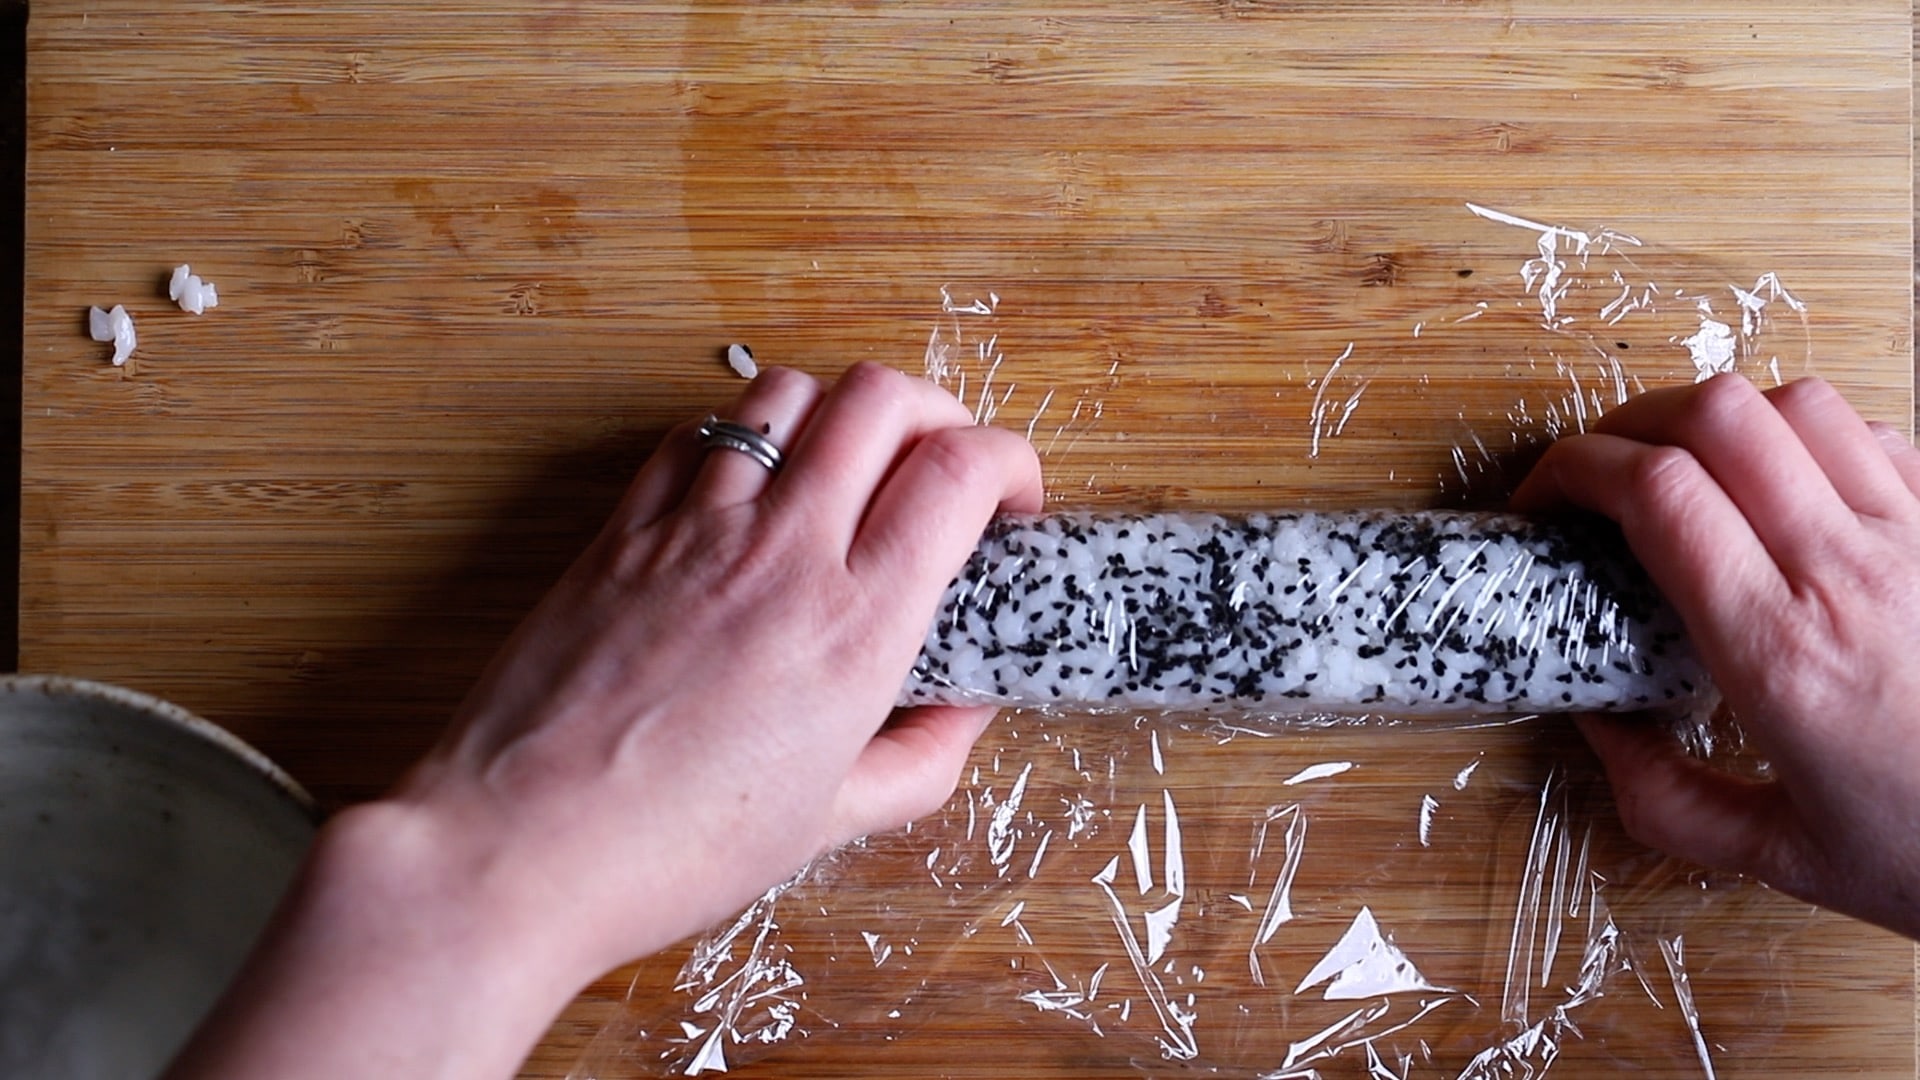 cover the california roll with cling film before slicing